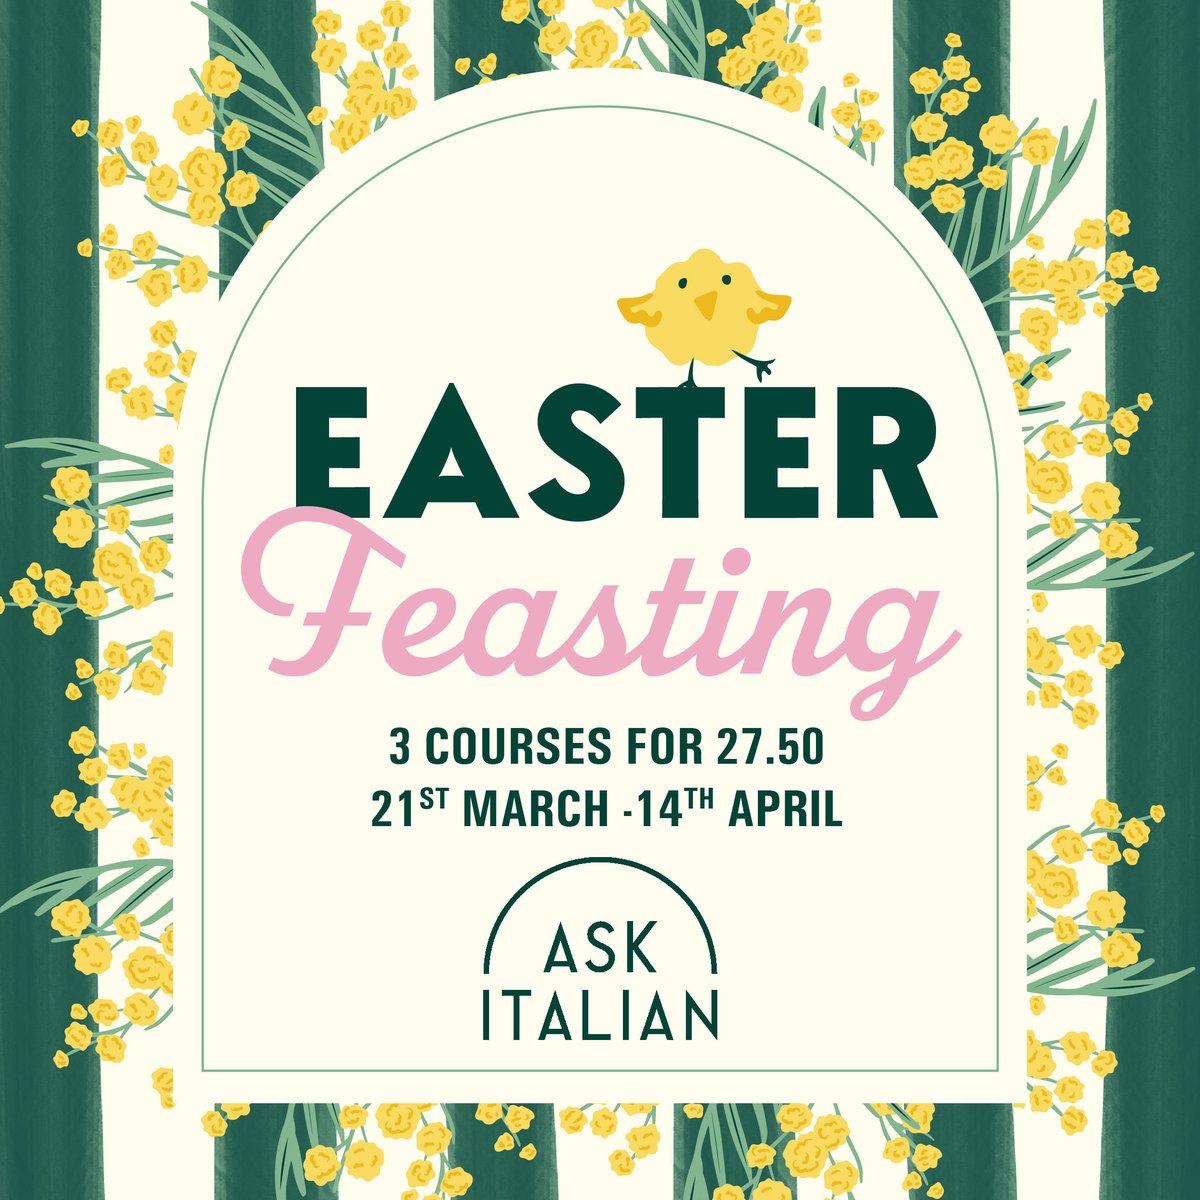 Spring has sprung at ASK Italian #Durham! 🐥🌼 Book now to take advantage of their Easter Feasting menu. Enjoy 3 courses for £27.50 between 21st March-14th April. 👉🏻 0191 383 2567 | bit.ly/ASK_Walkergate